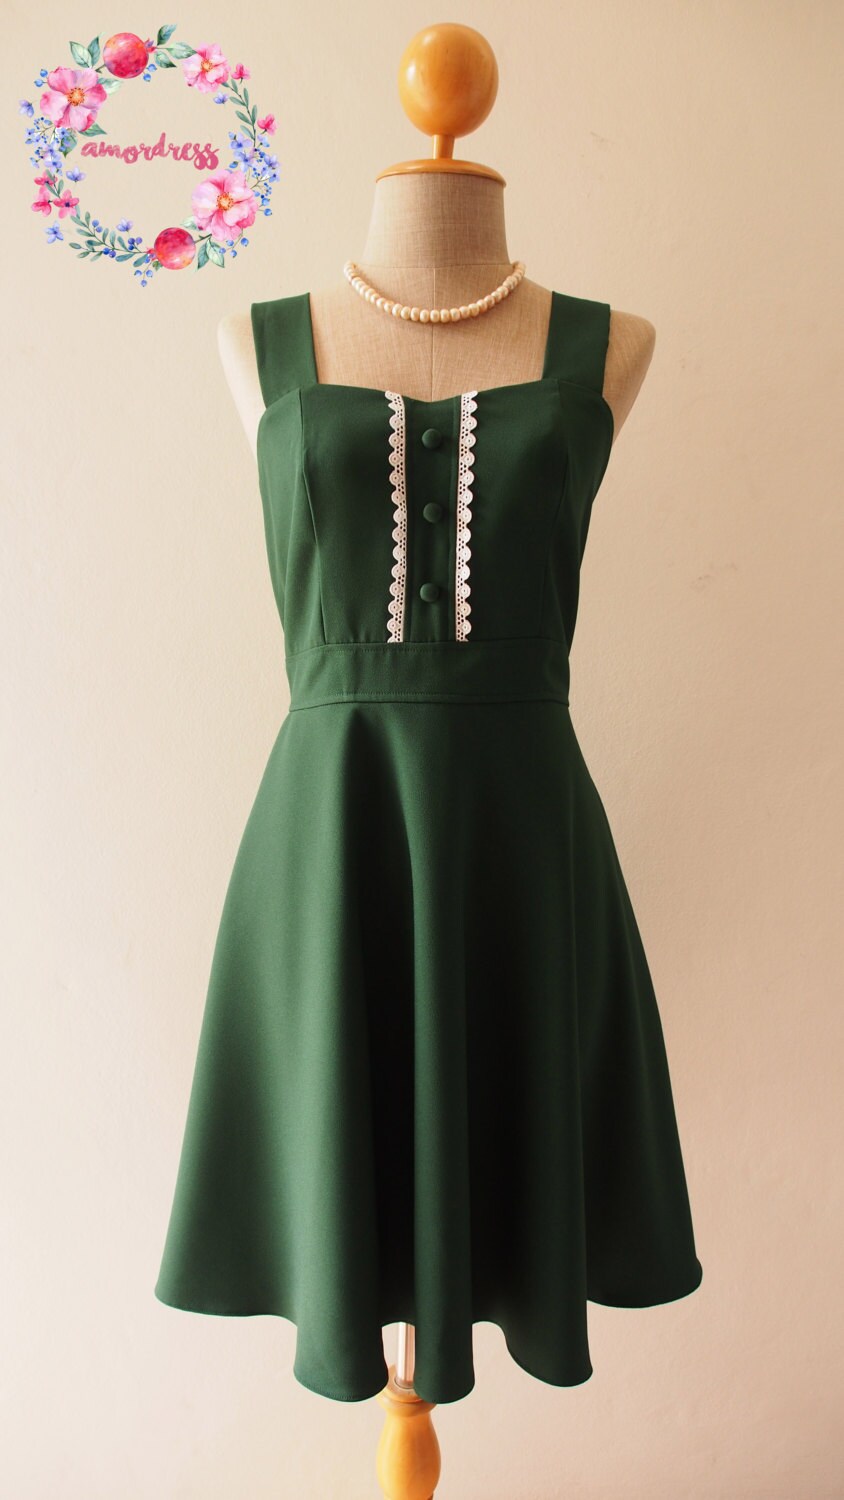 Vienna - Forest Green Bridesmaid Dress, Fit & Flare Party Dress Vintage Inspired Swing Dress-xs-xl, Custom